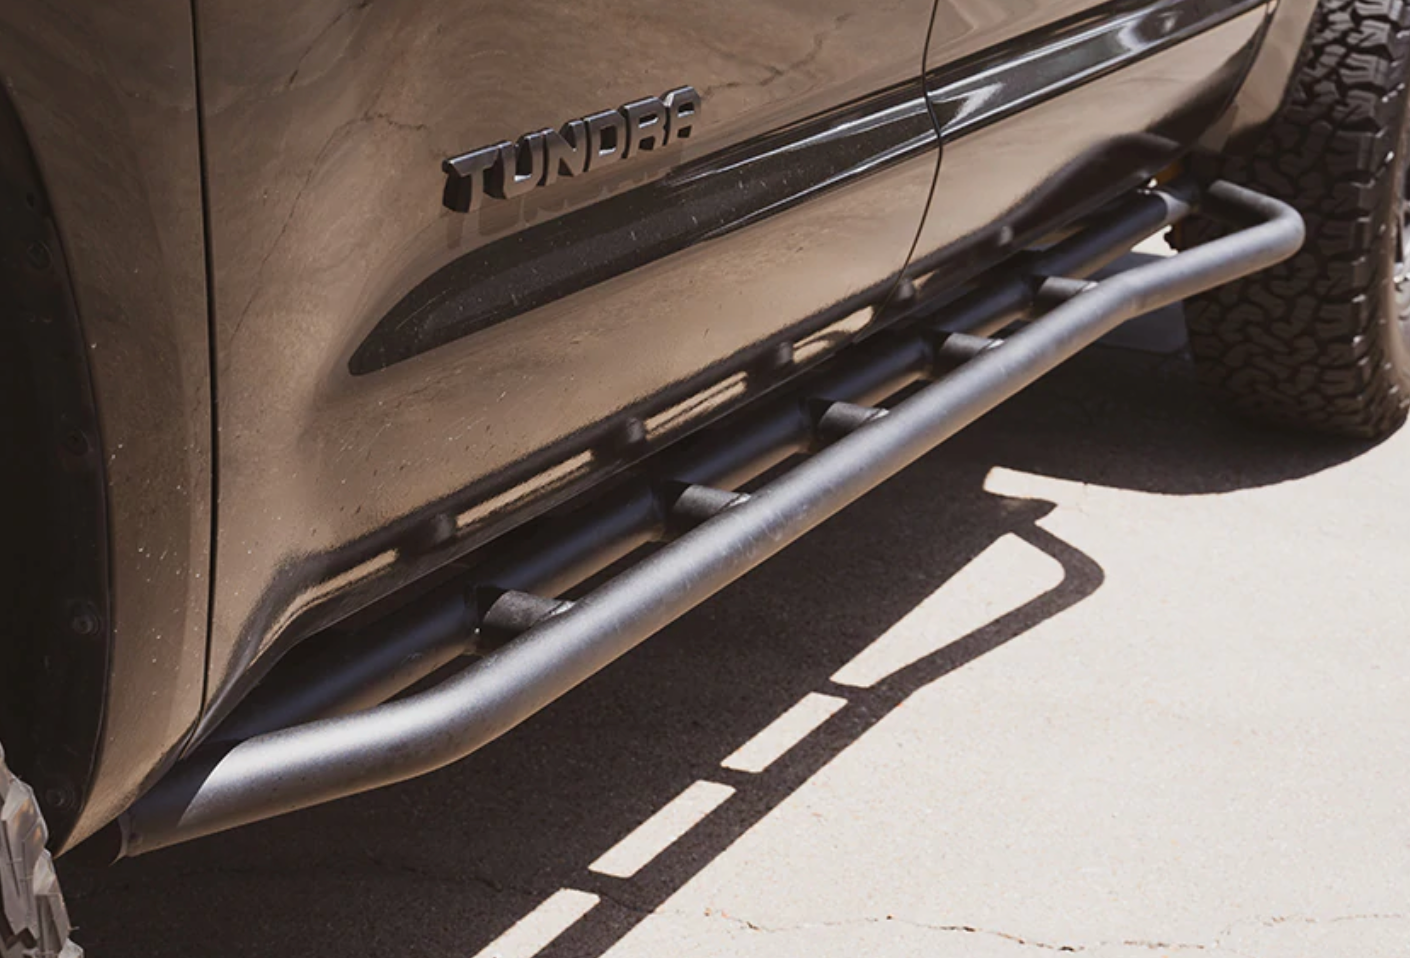 2014-2021 TOYOTA TUNDRA TRAIL EDITION ROCK SLIDERS-Offroad Scout